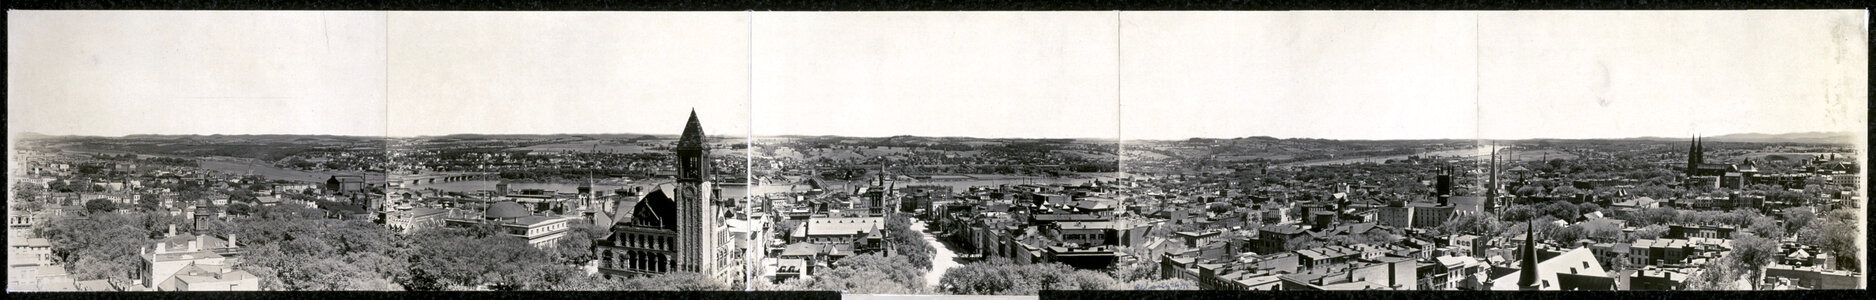 Panorama of the Cityscape of Albany, New York in 1906 photo